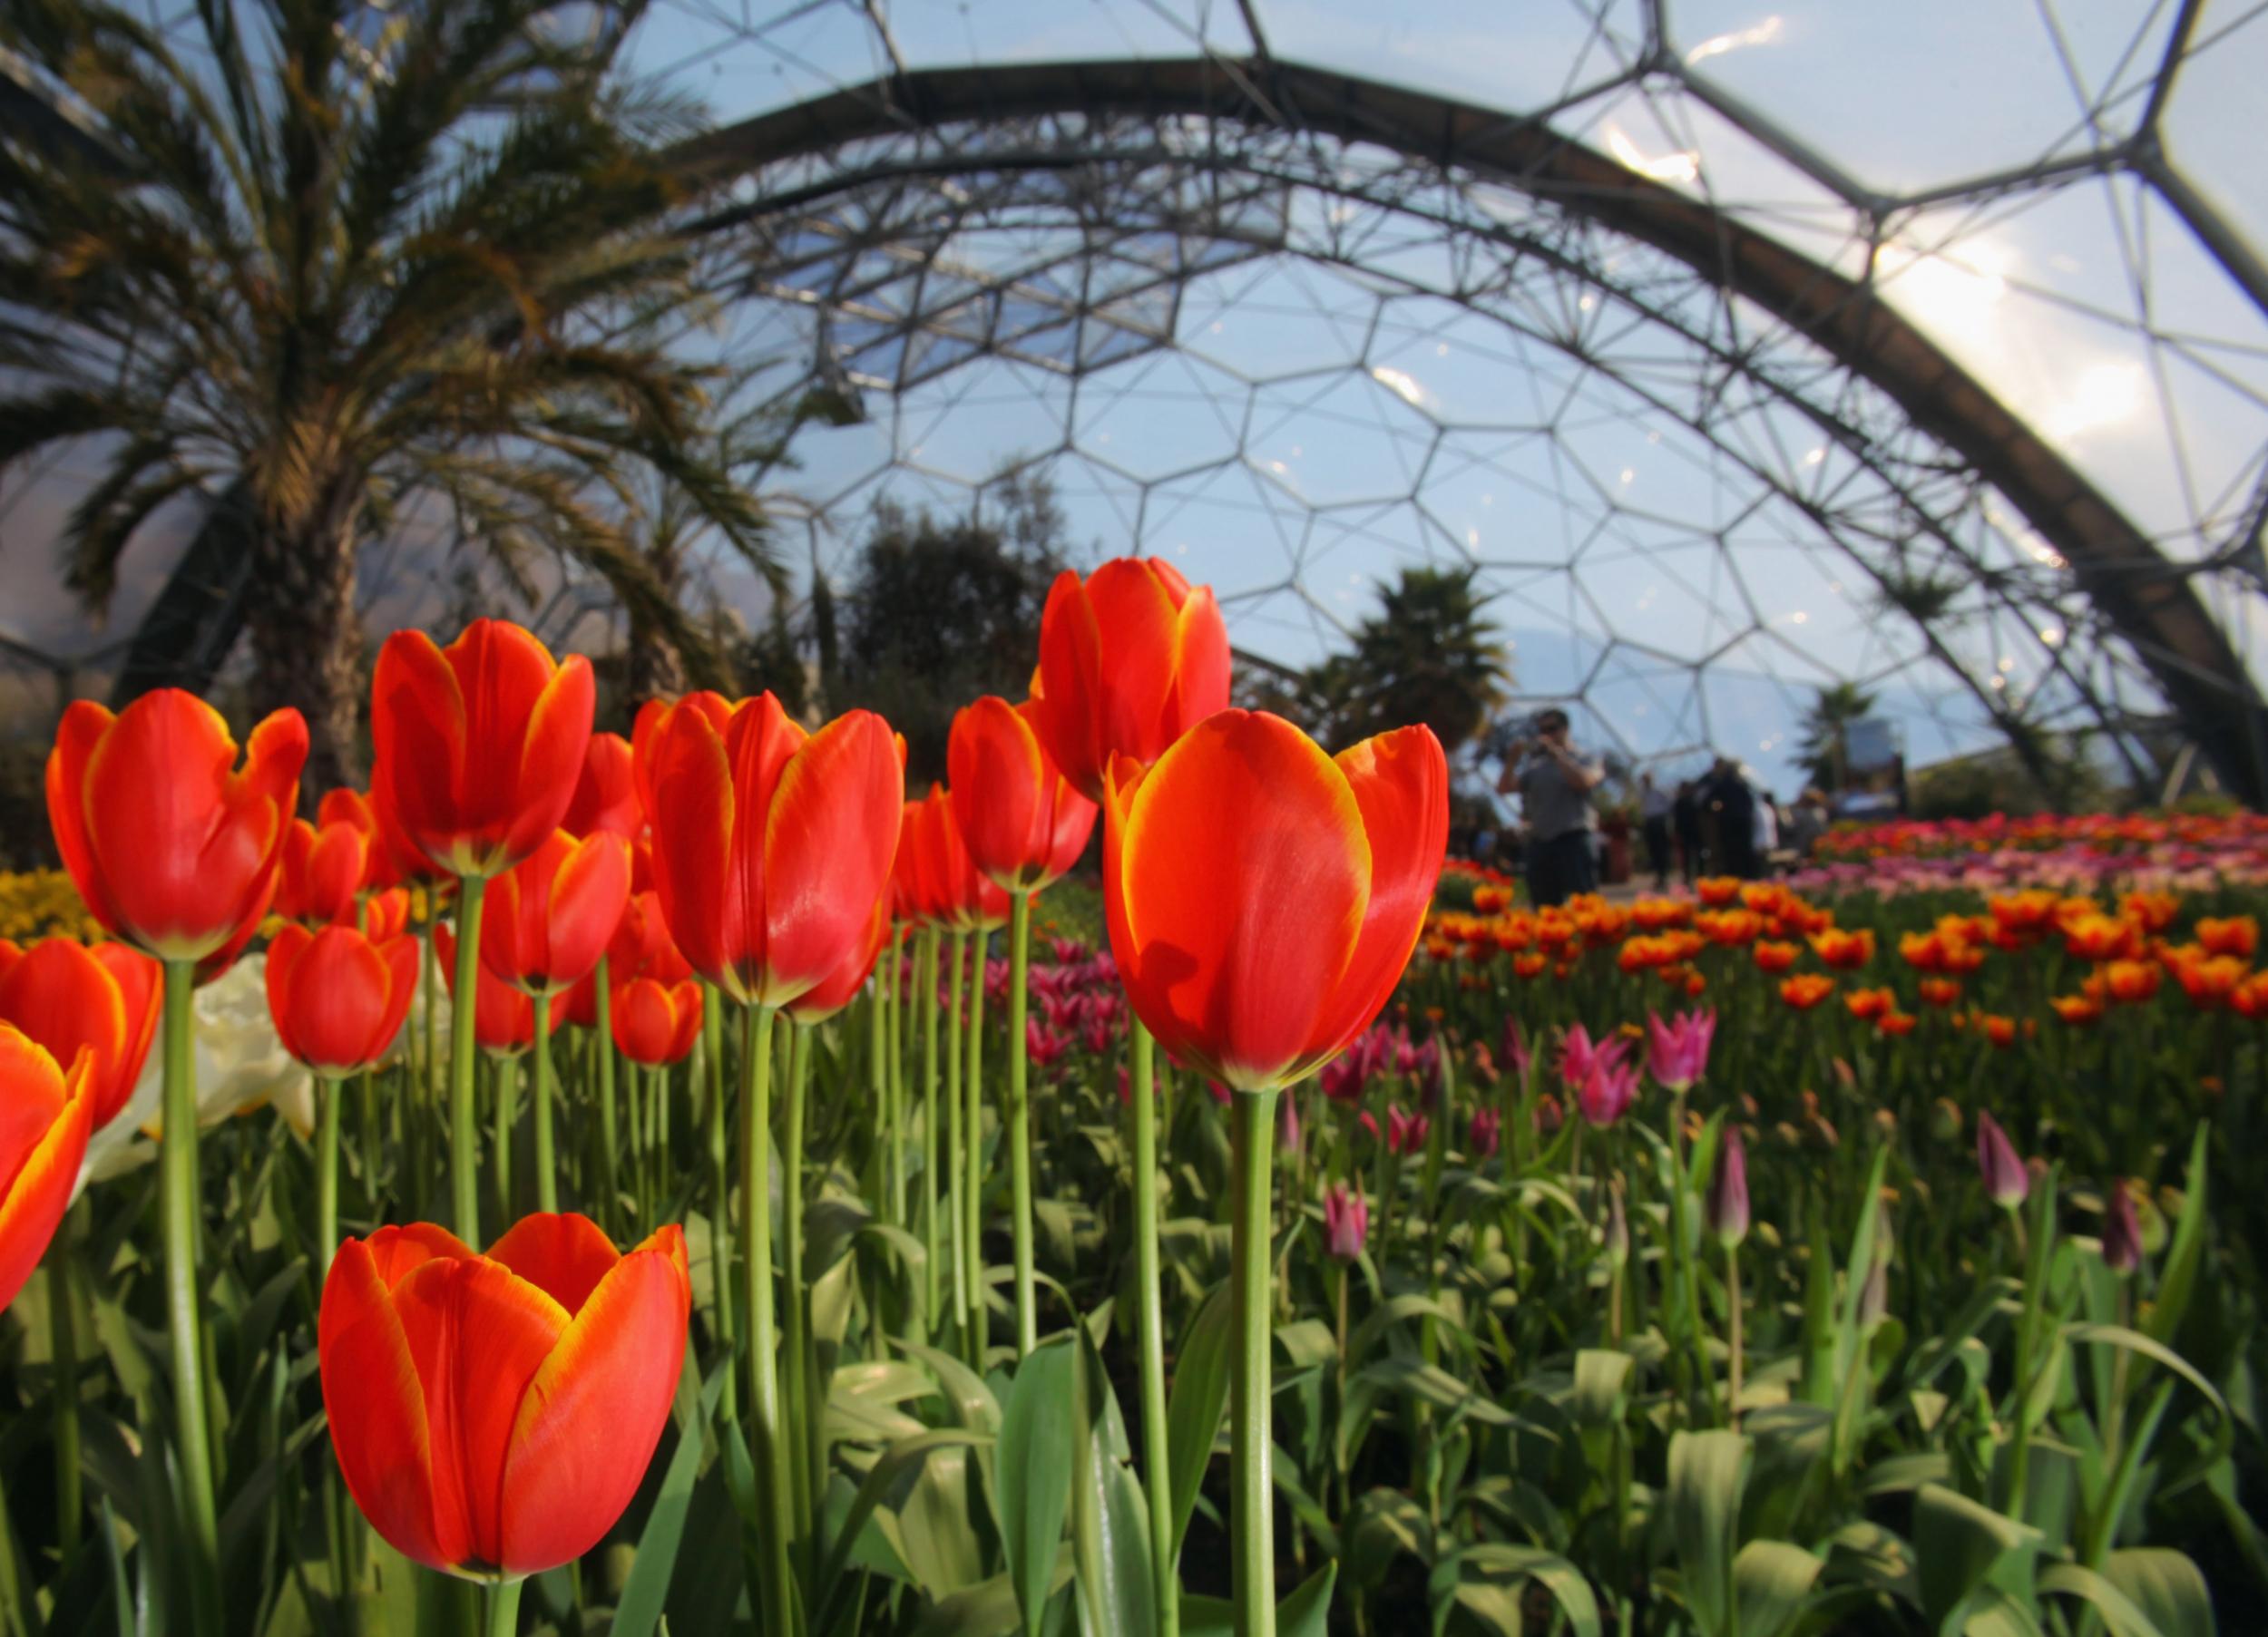 Spring is in full bloom at the Eden Project in Cornwall, which got a gong for its work for customers with disabilities